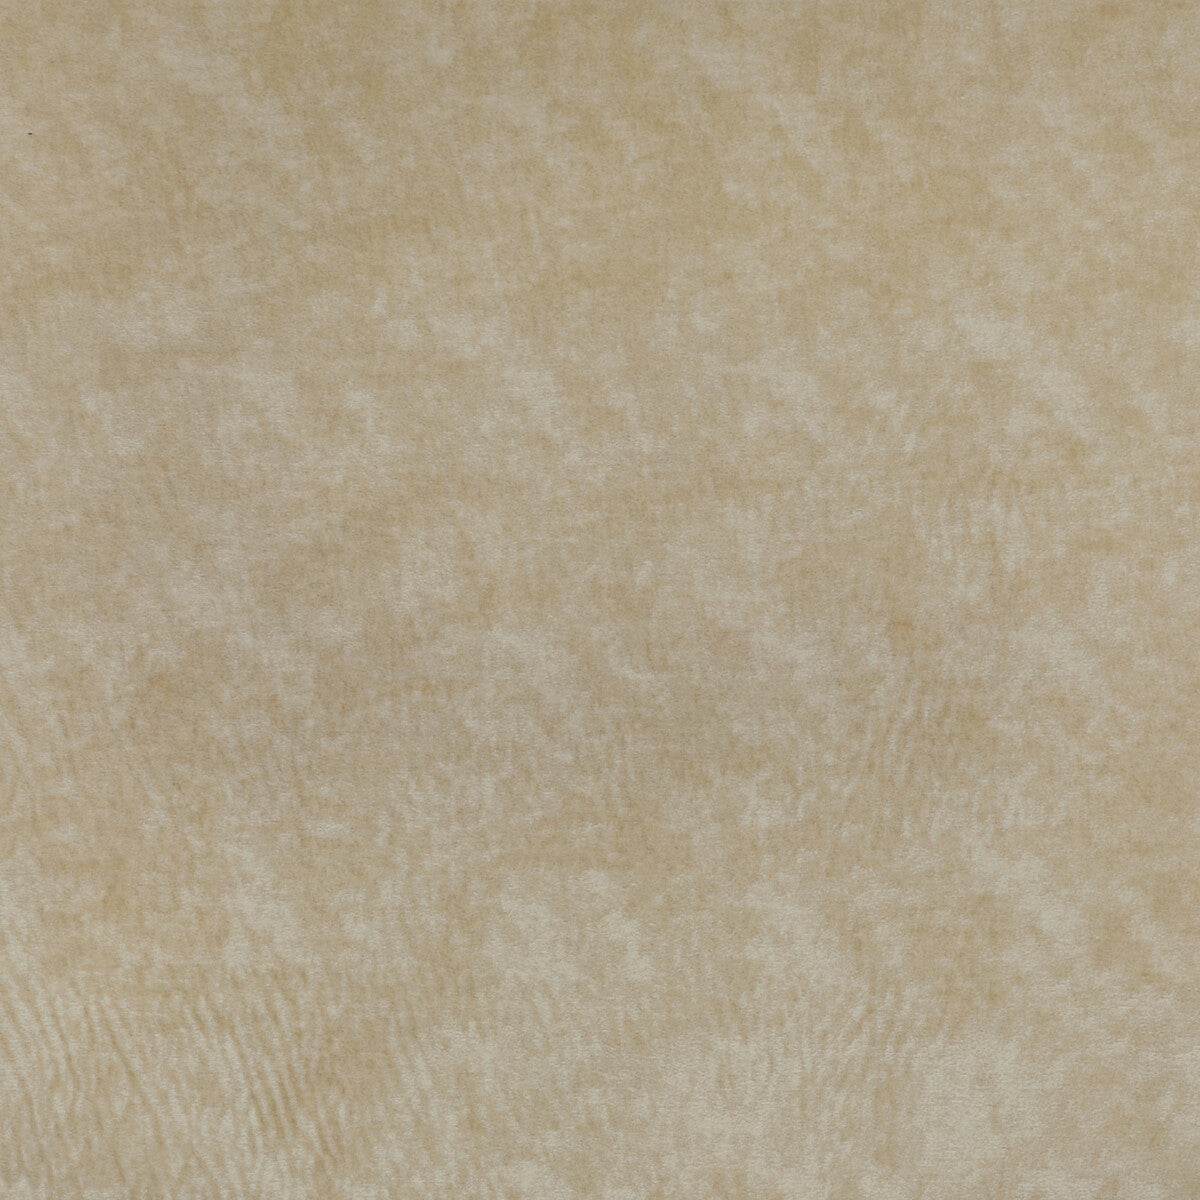 Triumphant fabric in creme color - pattern 36065.116.0 - by Kravet Couture